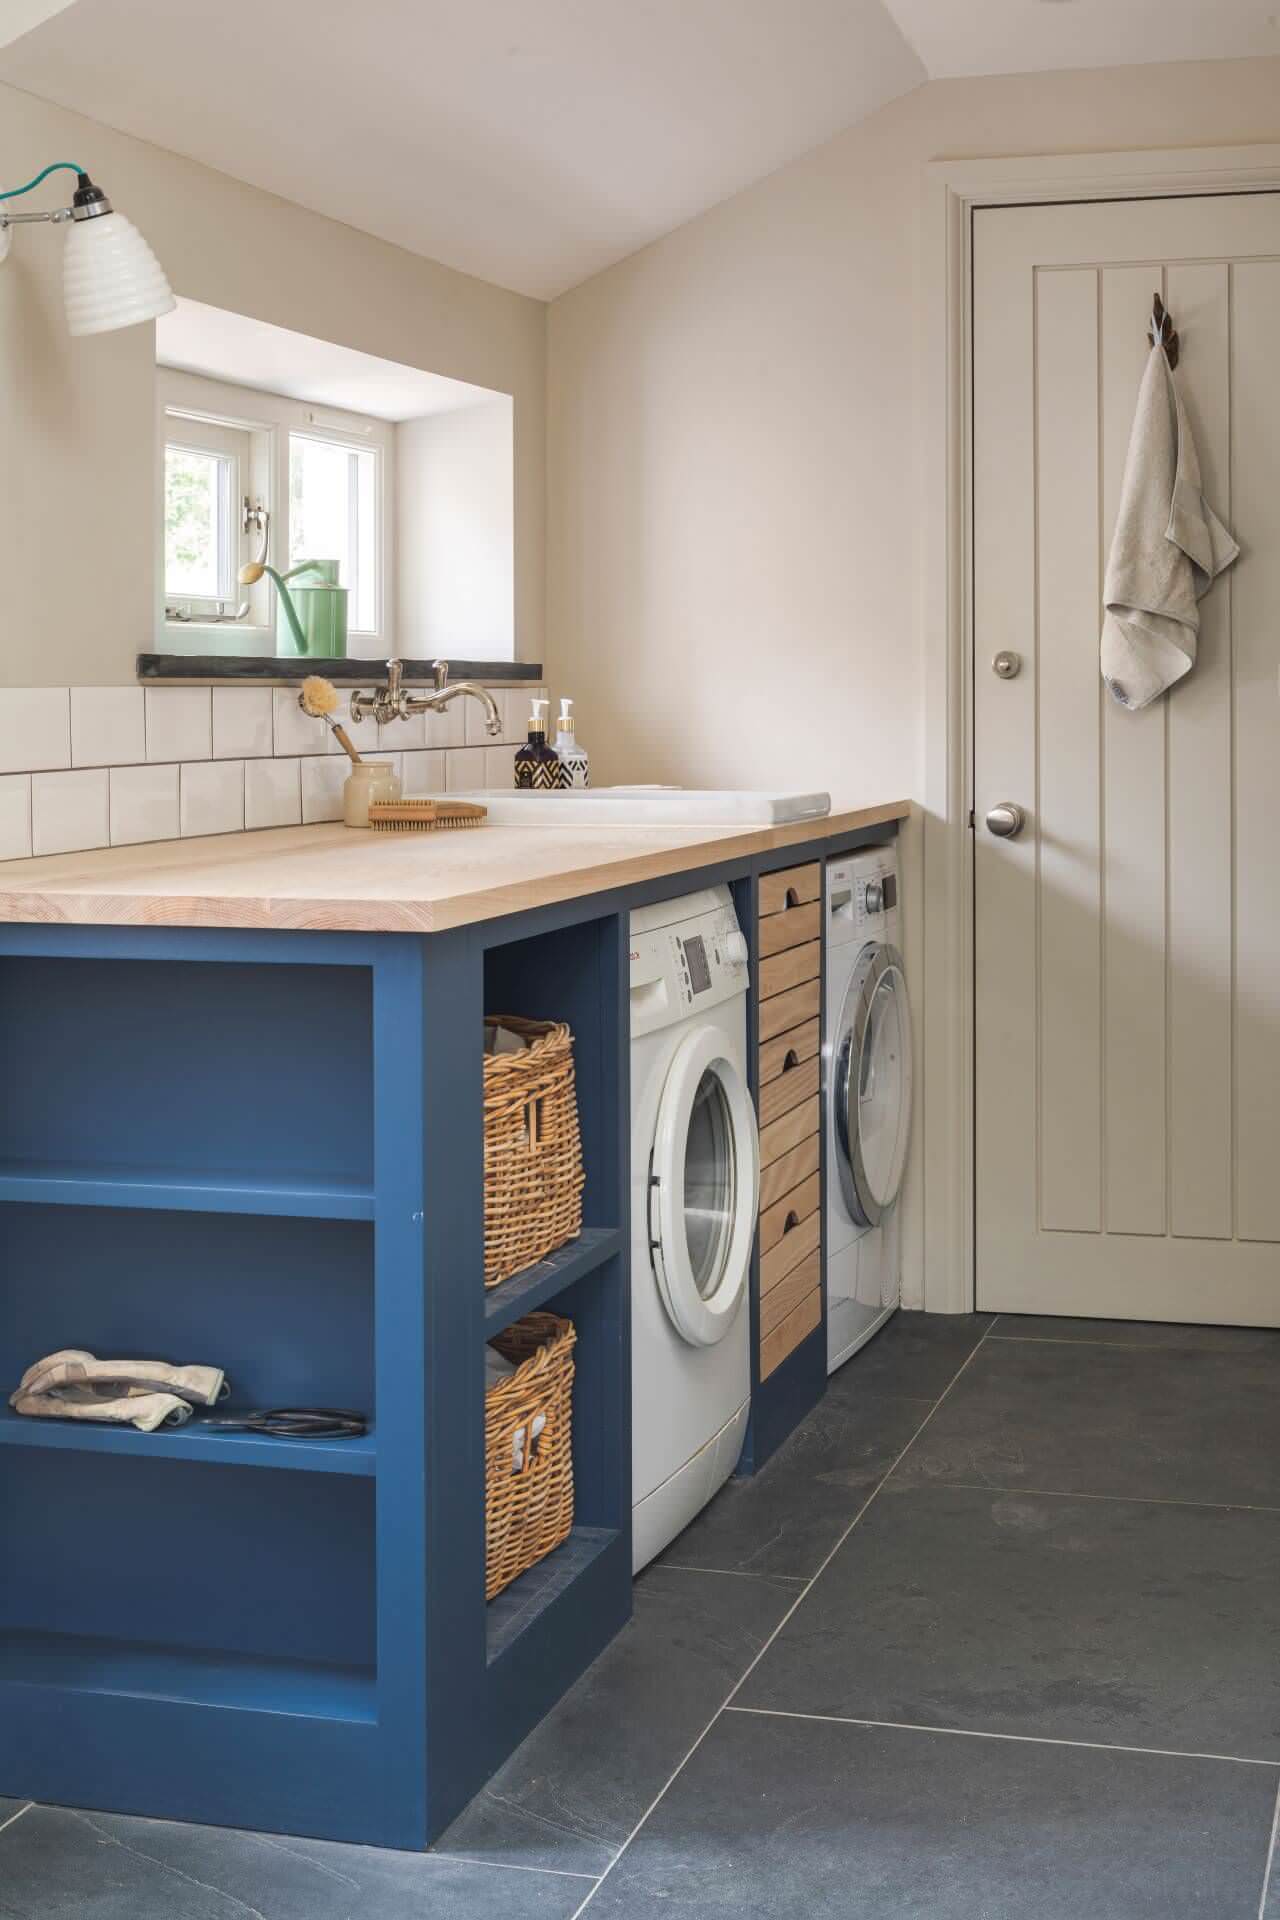 Utility room ideas for beautiful, functional and lovely storage